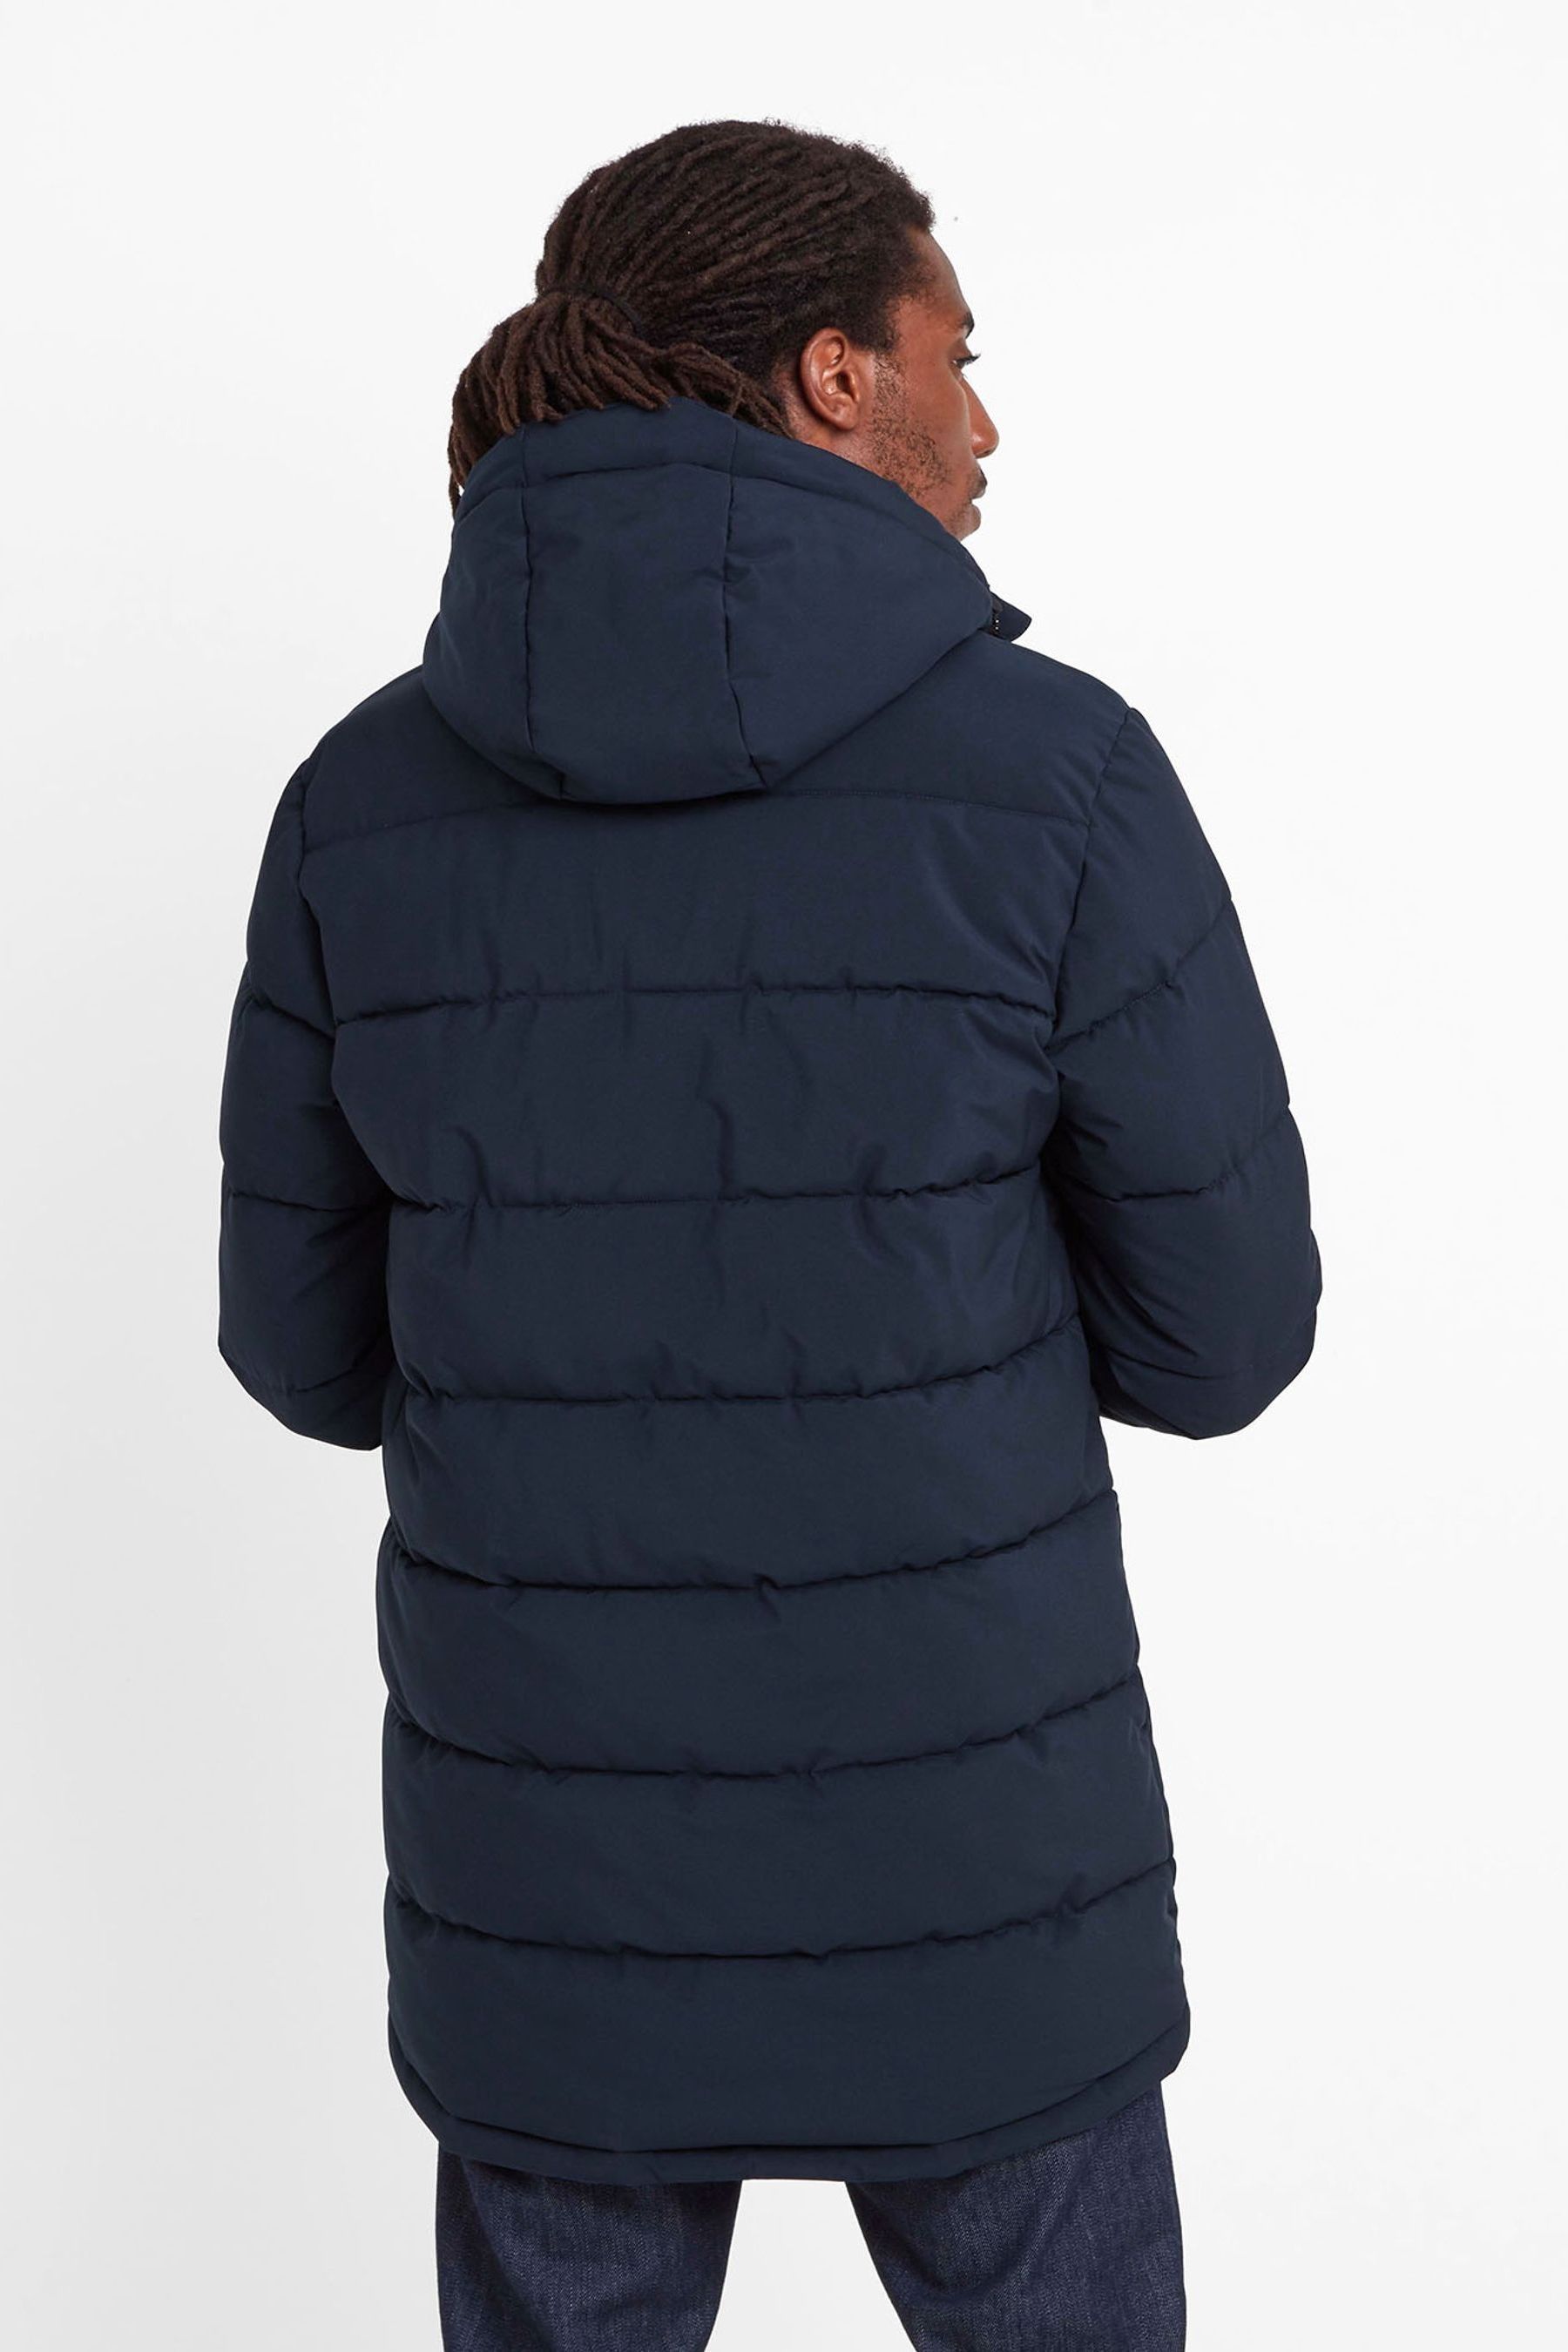 Buy Tog 24 Blue Watson Long Insulated Jacket from the Next UK online shop